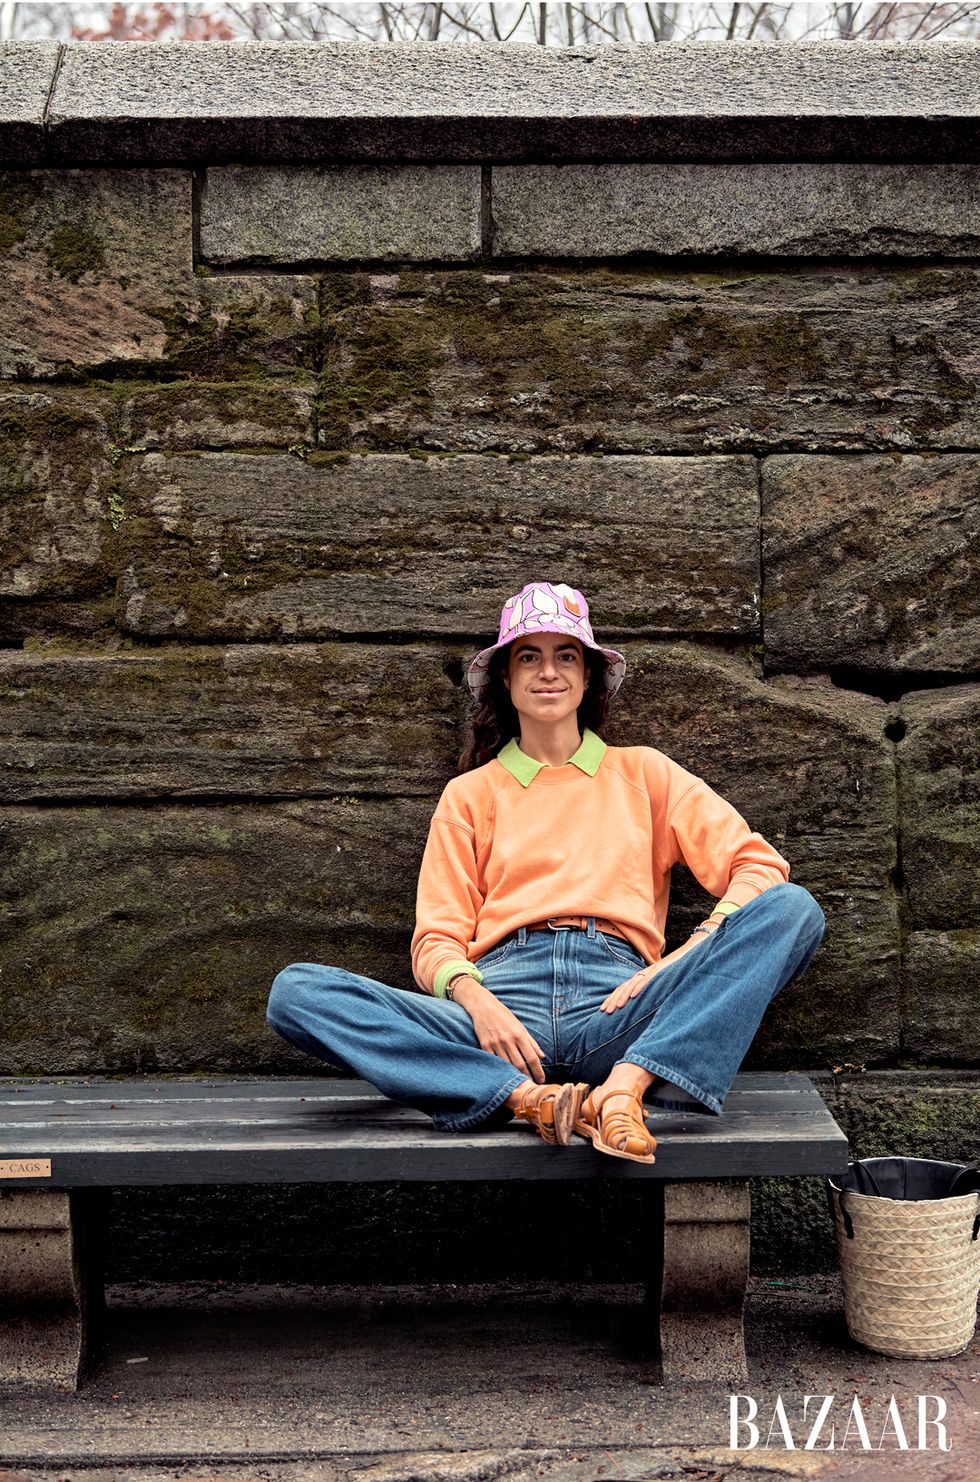 leandra sits on a bench